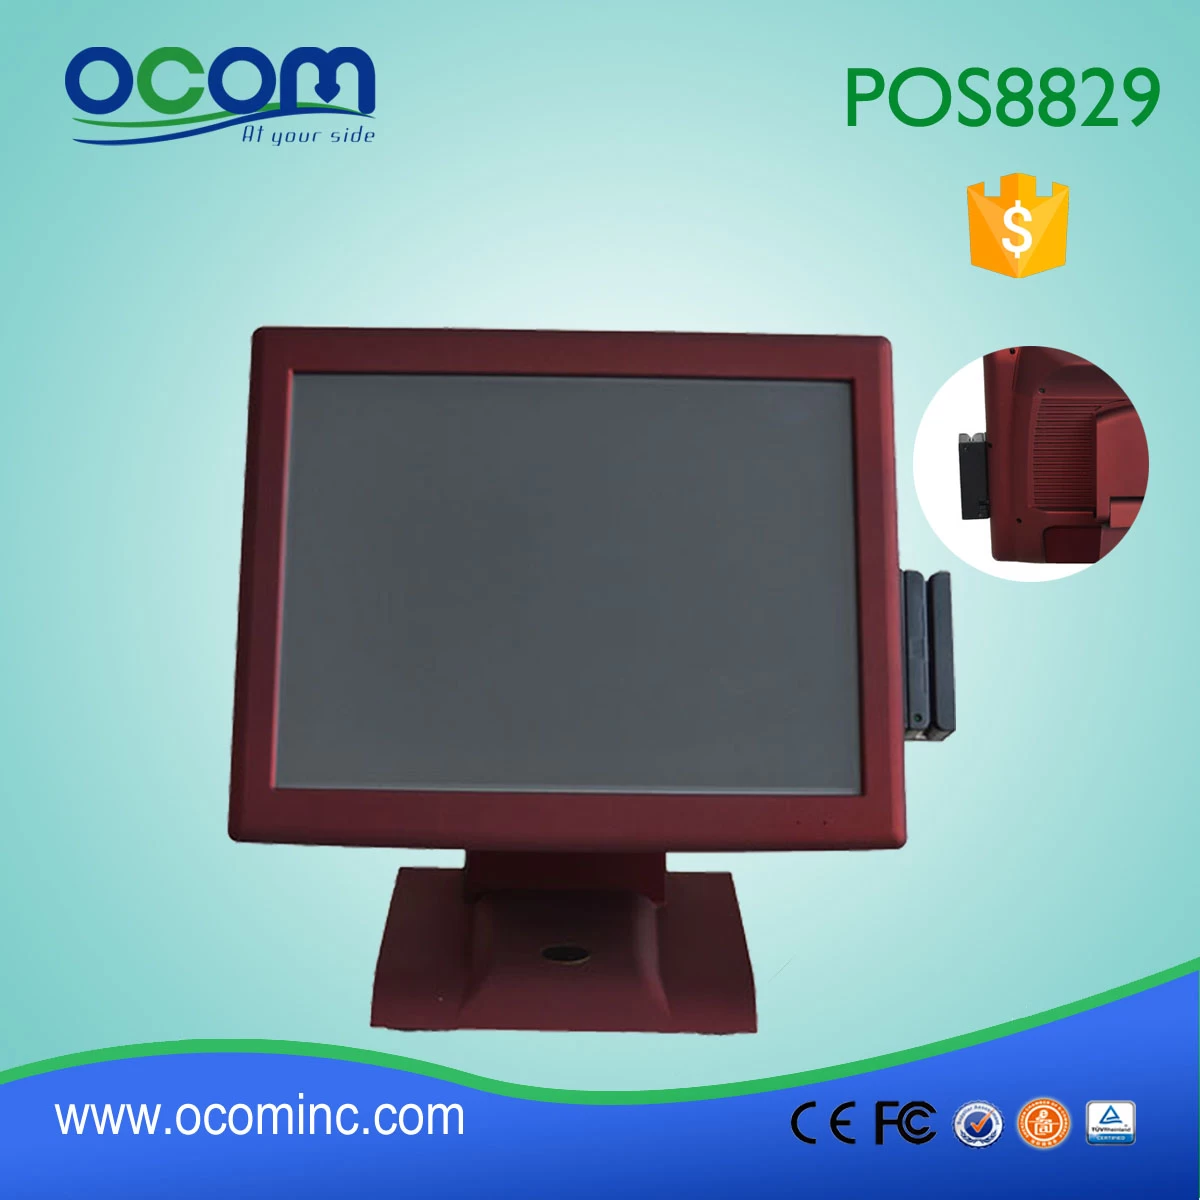 2015 All in one touch pos terminal POS8829